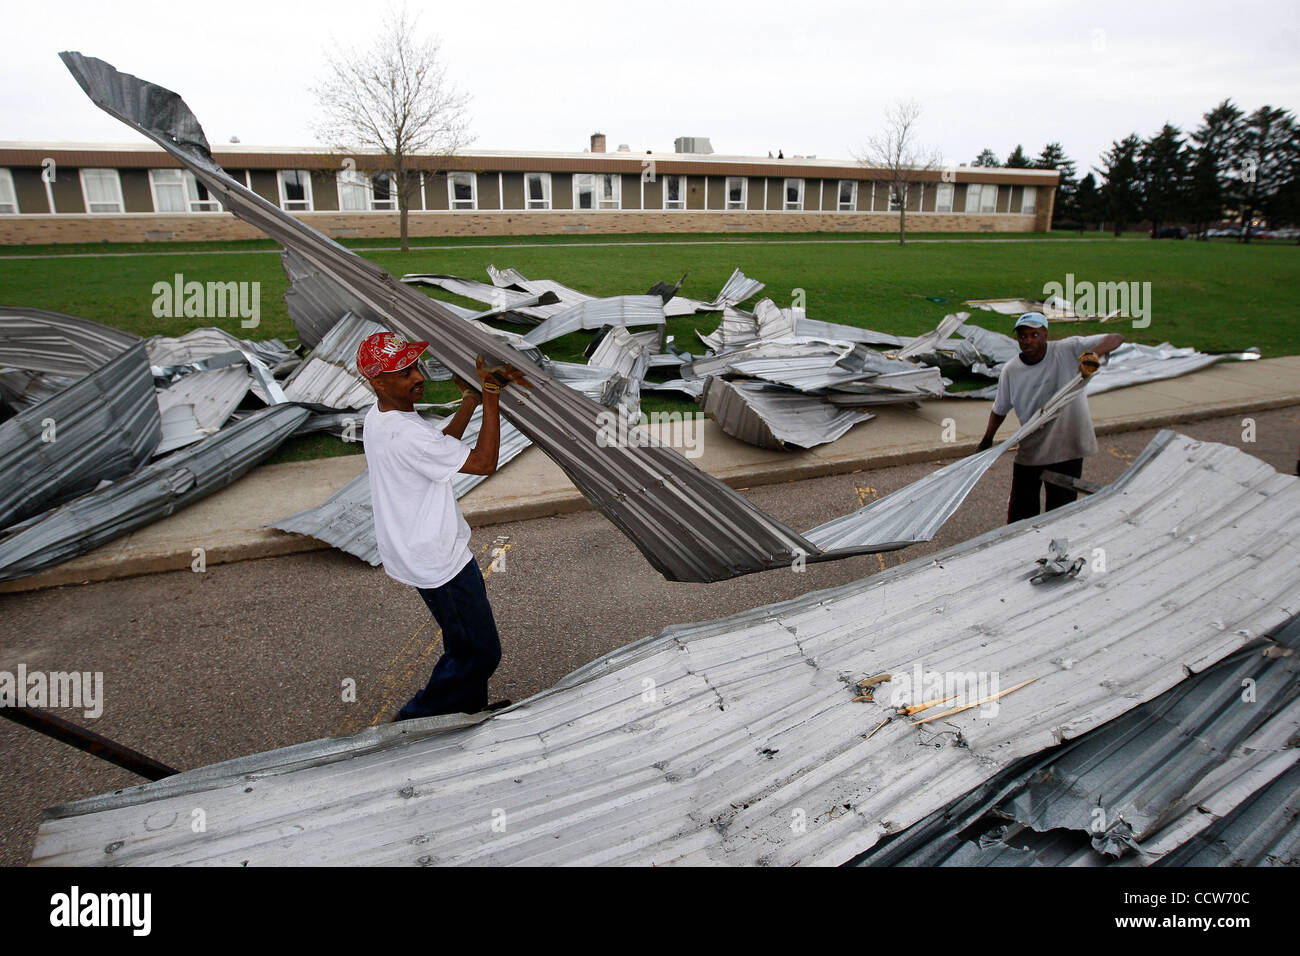 Apr 06, 2010 - Dowagiac, Michigan, USA - High winds destroyed a hanger at Dowagiac Municipal Airport. Metal roofing from the hanger was blown across M51, landing in the parking lot of Dowagiac High School. Doug Wolverton , 41, and his friend clear the metal roofing from in front of the school. At le Stock Photo